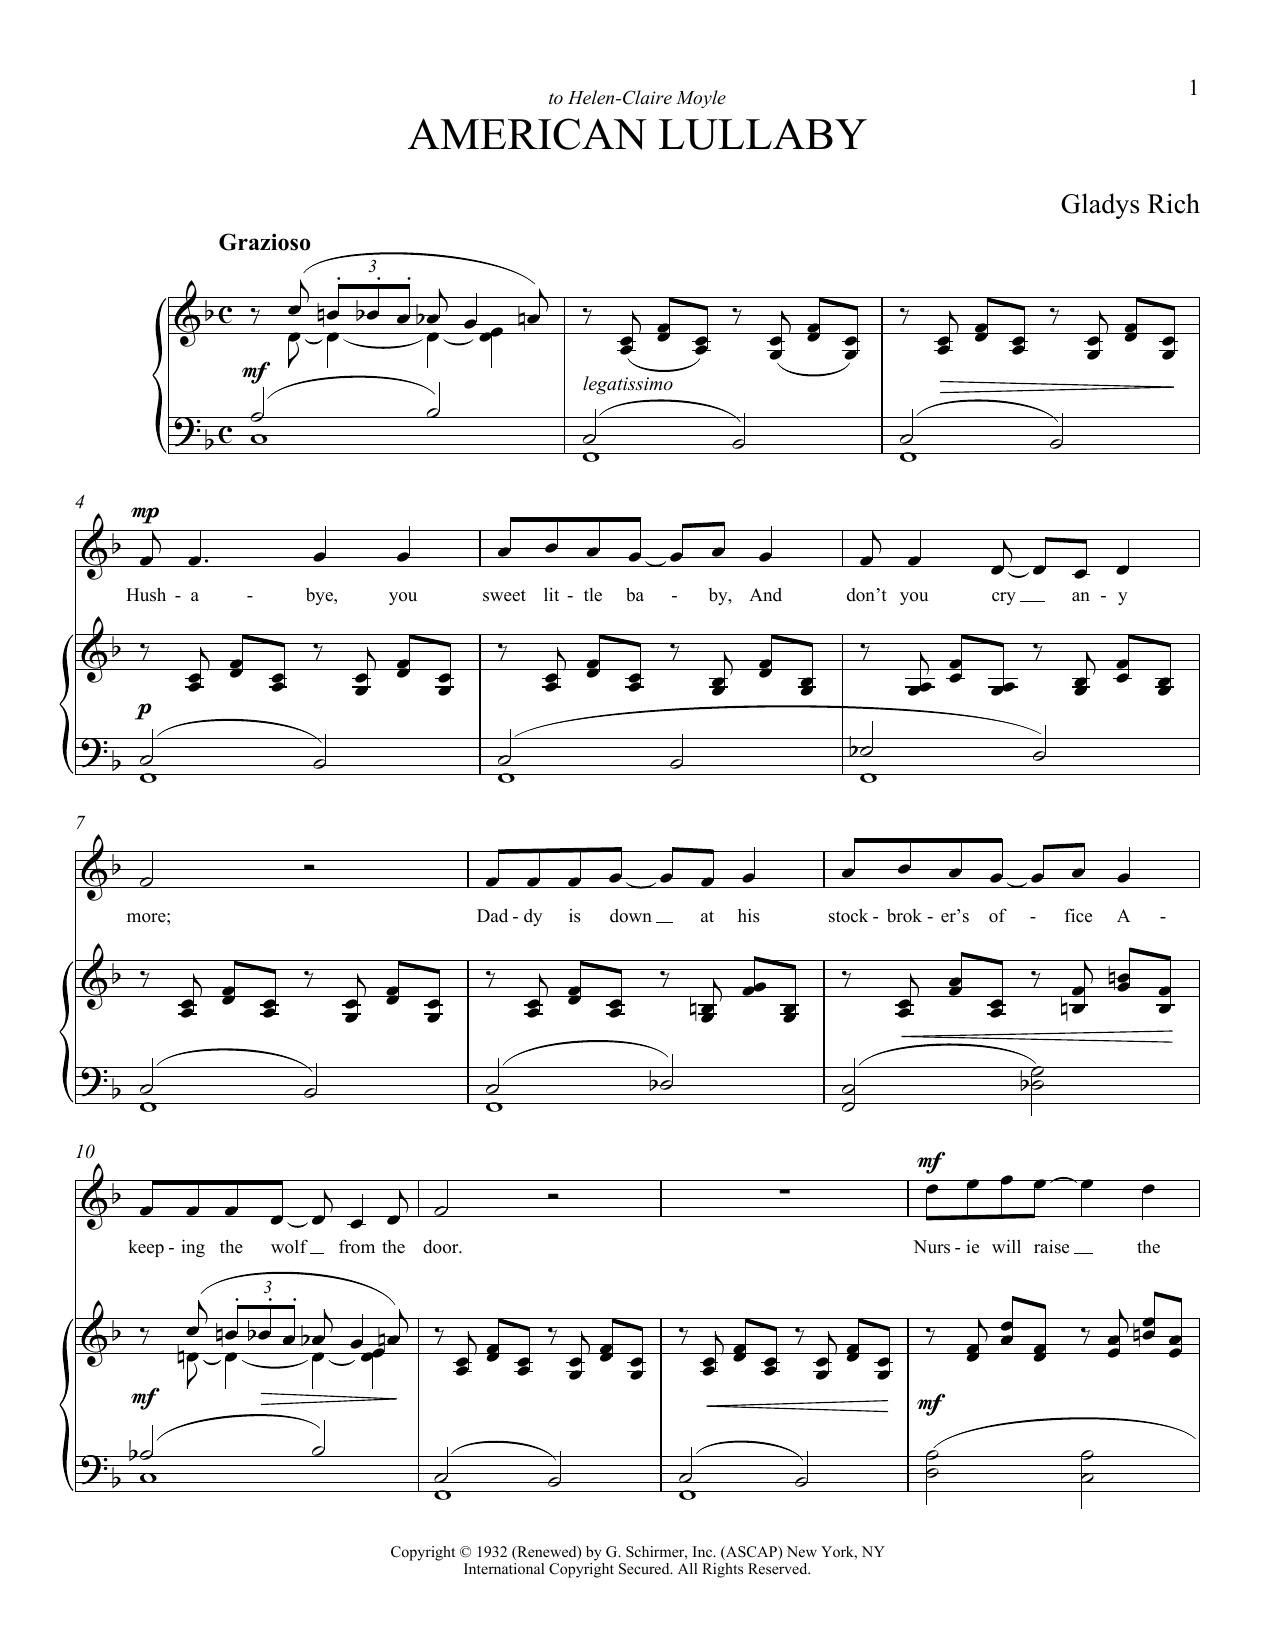 Download Gladys Rich American Lullaby Sheet Music